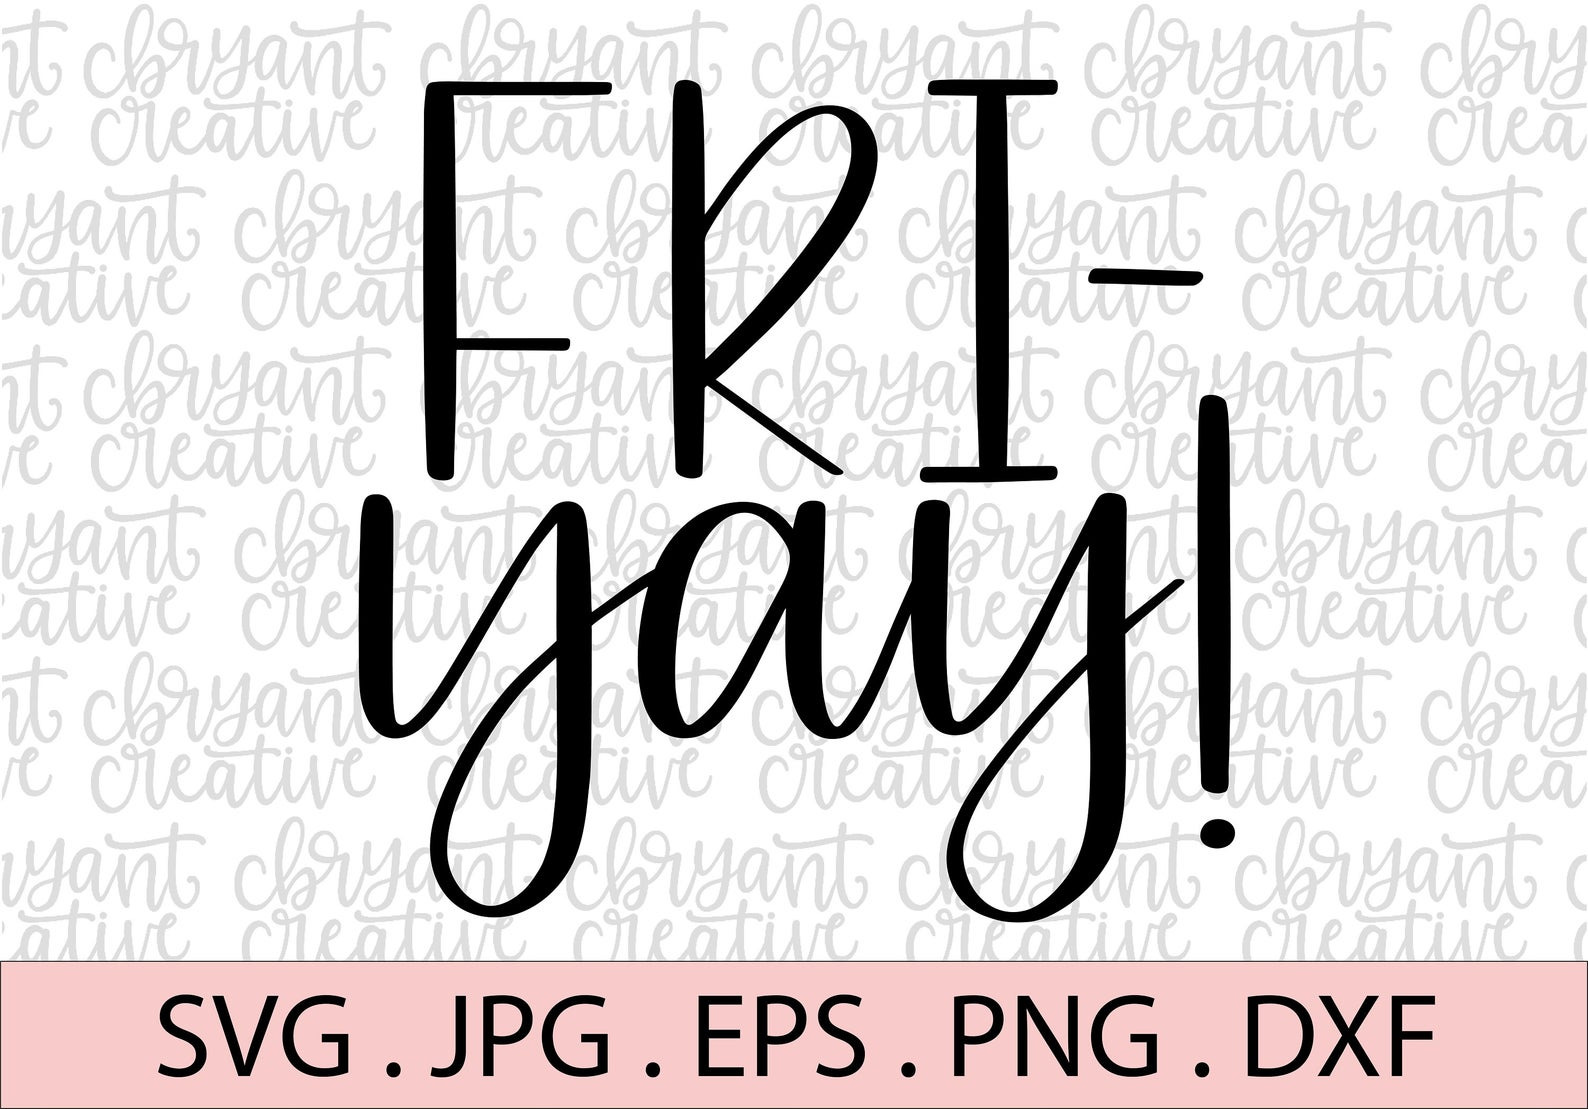 What font if this FRI-yay!